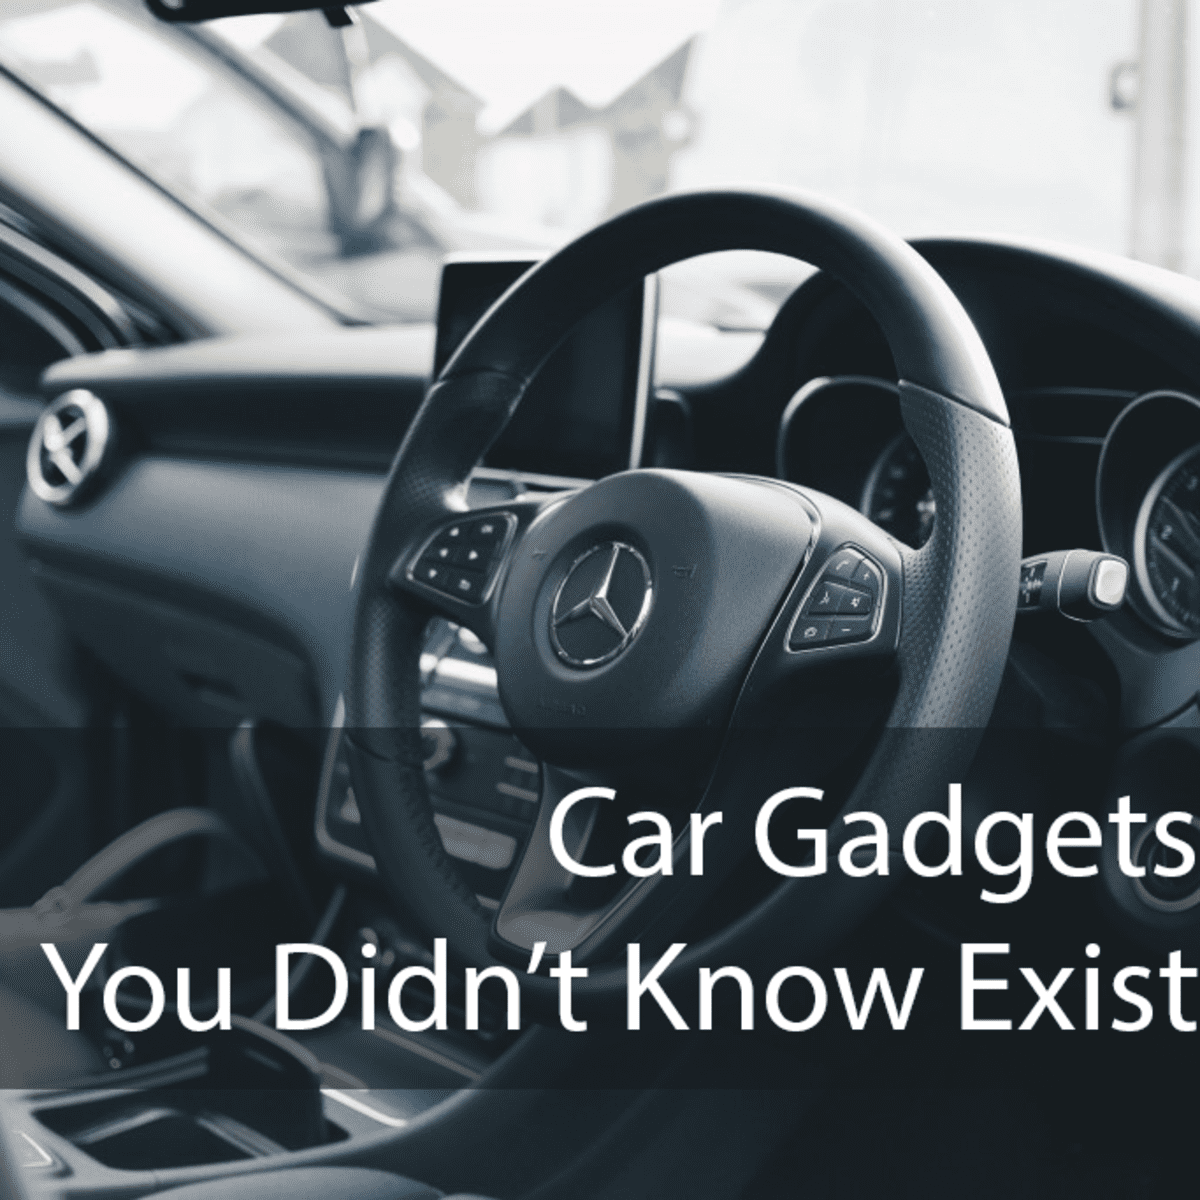 12 Car Gadgets and Accessories You Know Existed - AxleAddict